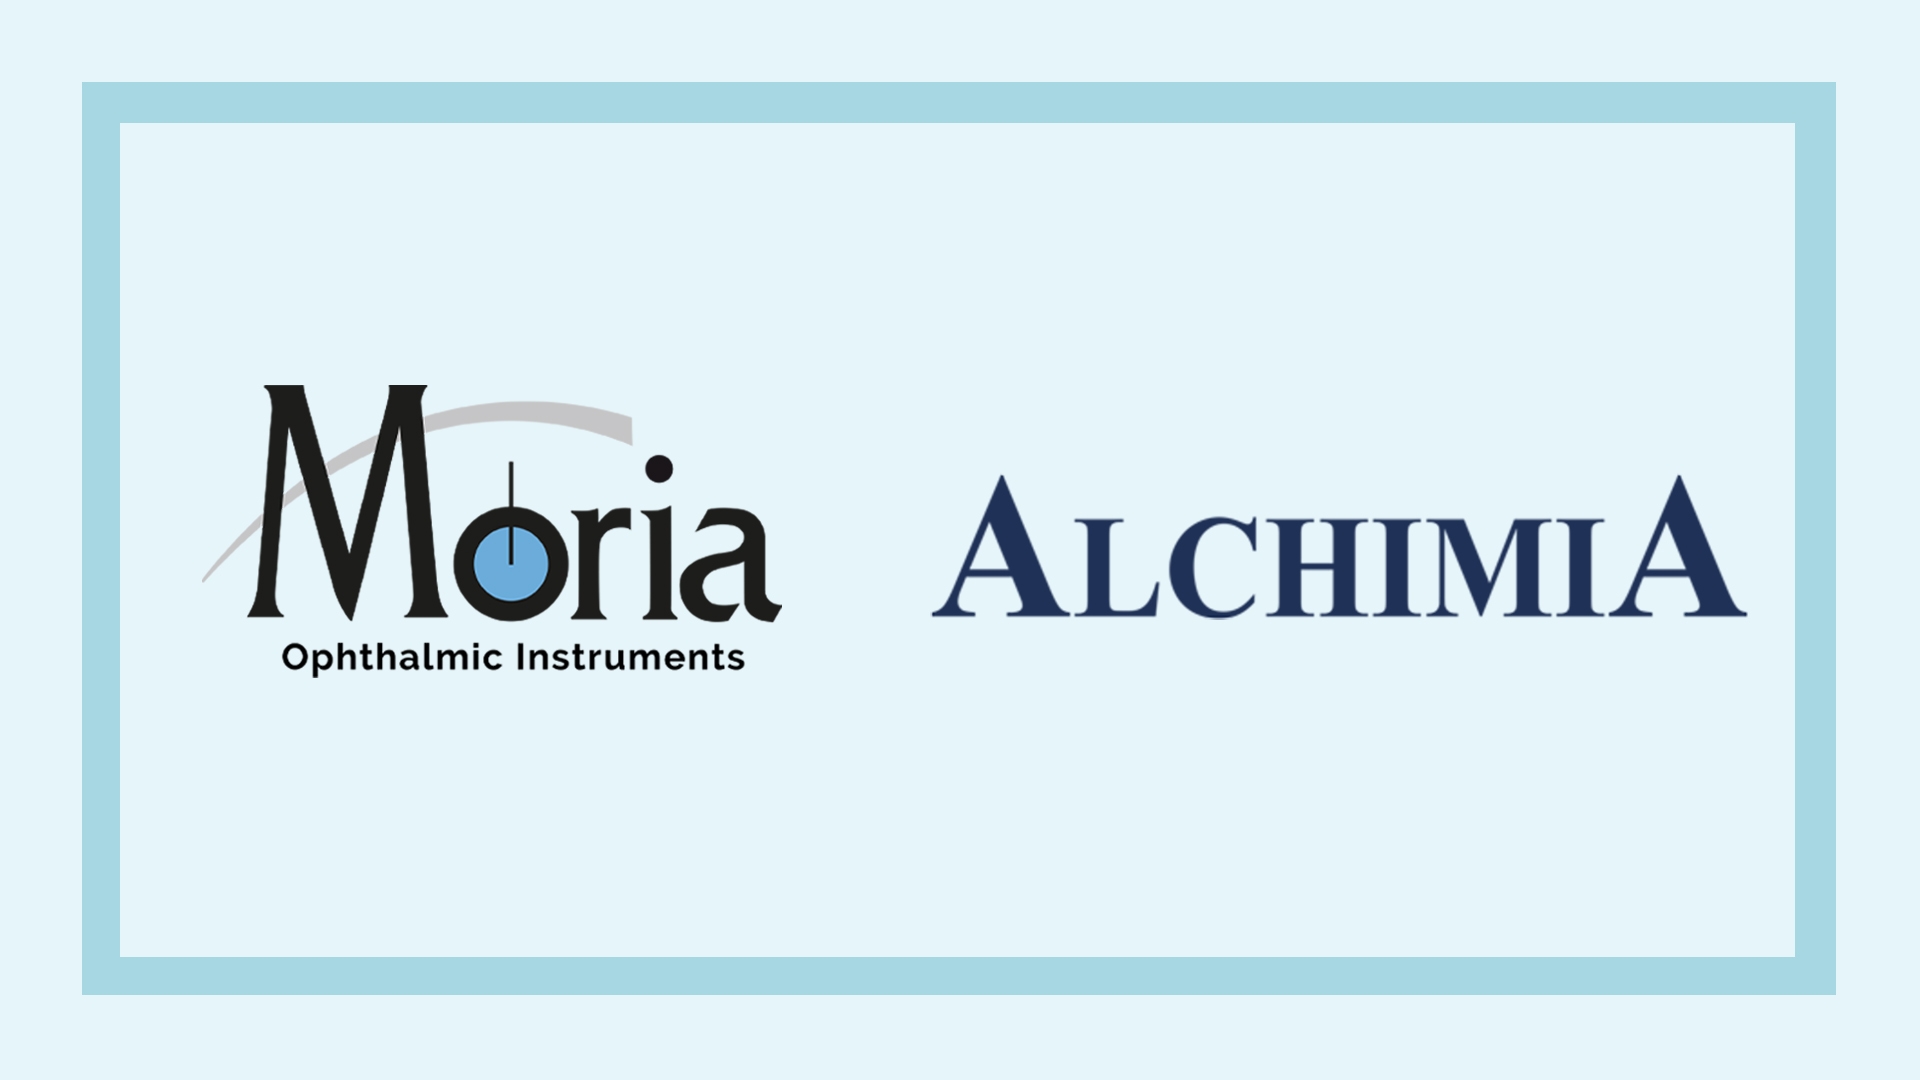 Moria expands its footprint into eye surgery by acquiring ALCHIMIA SRL